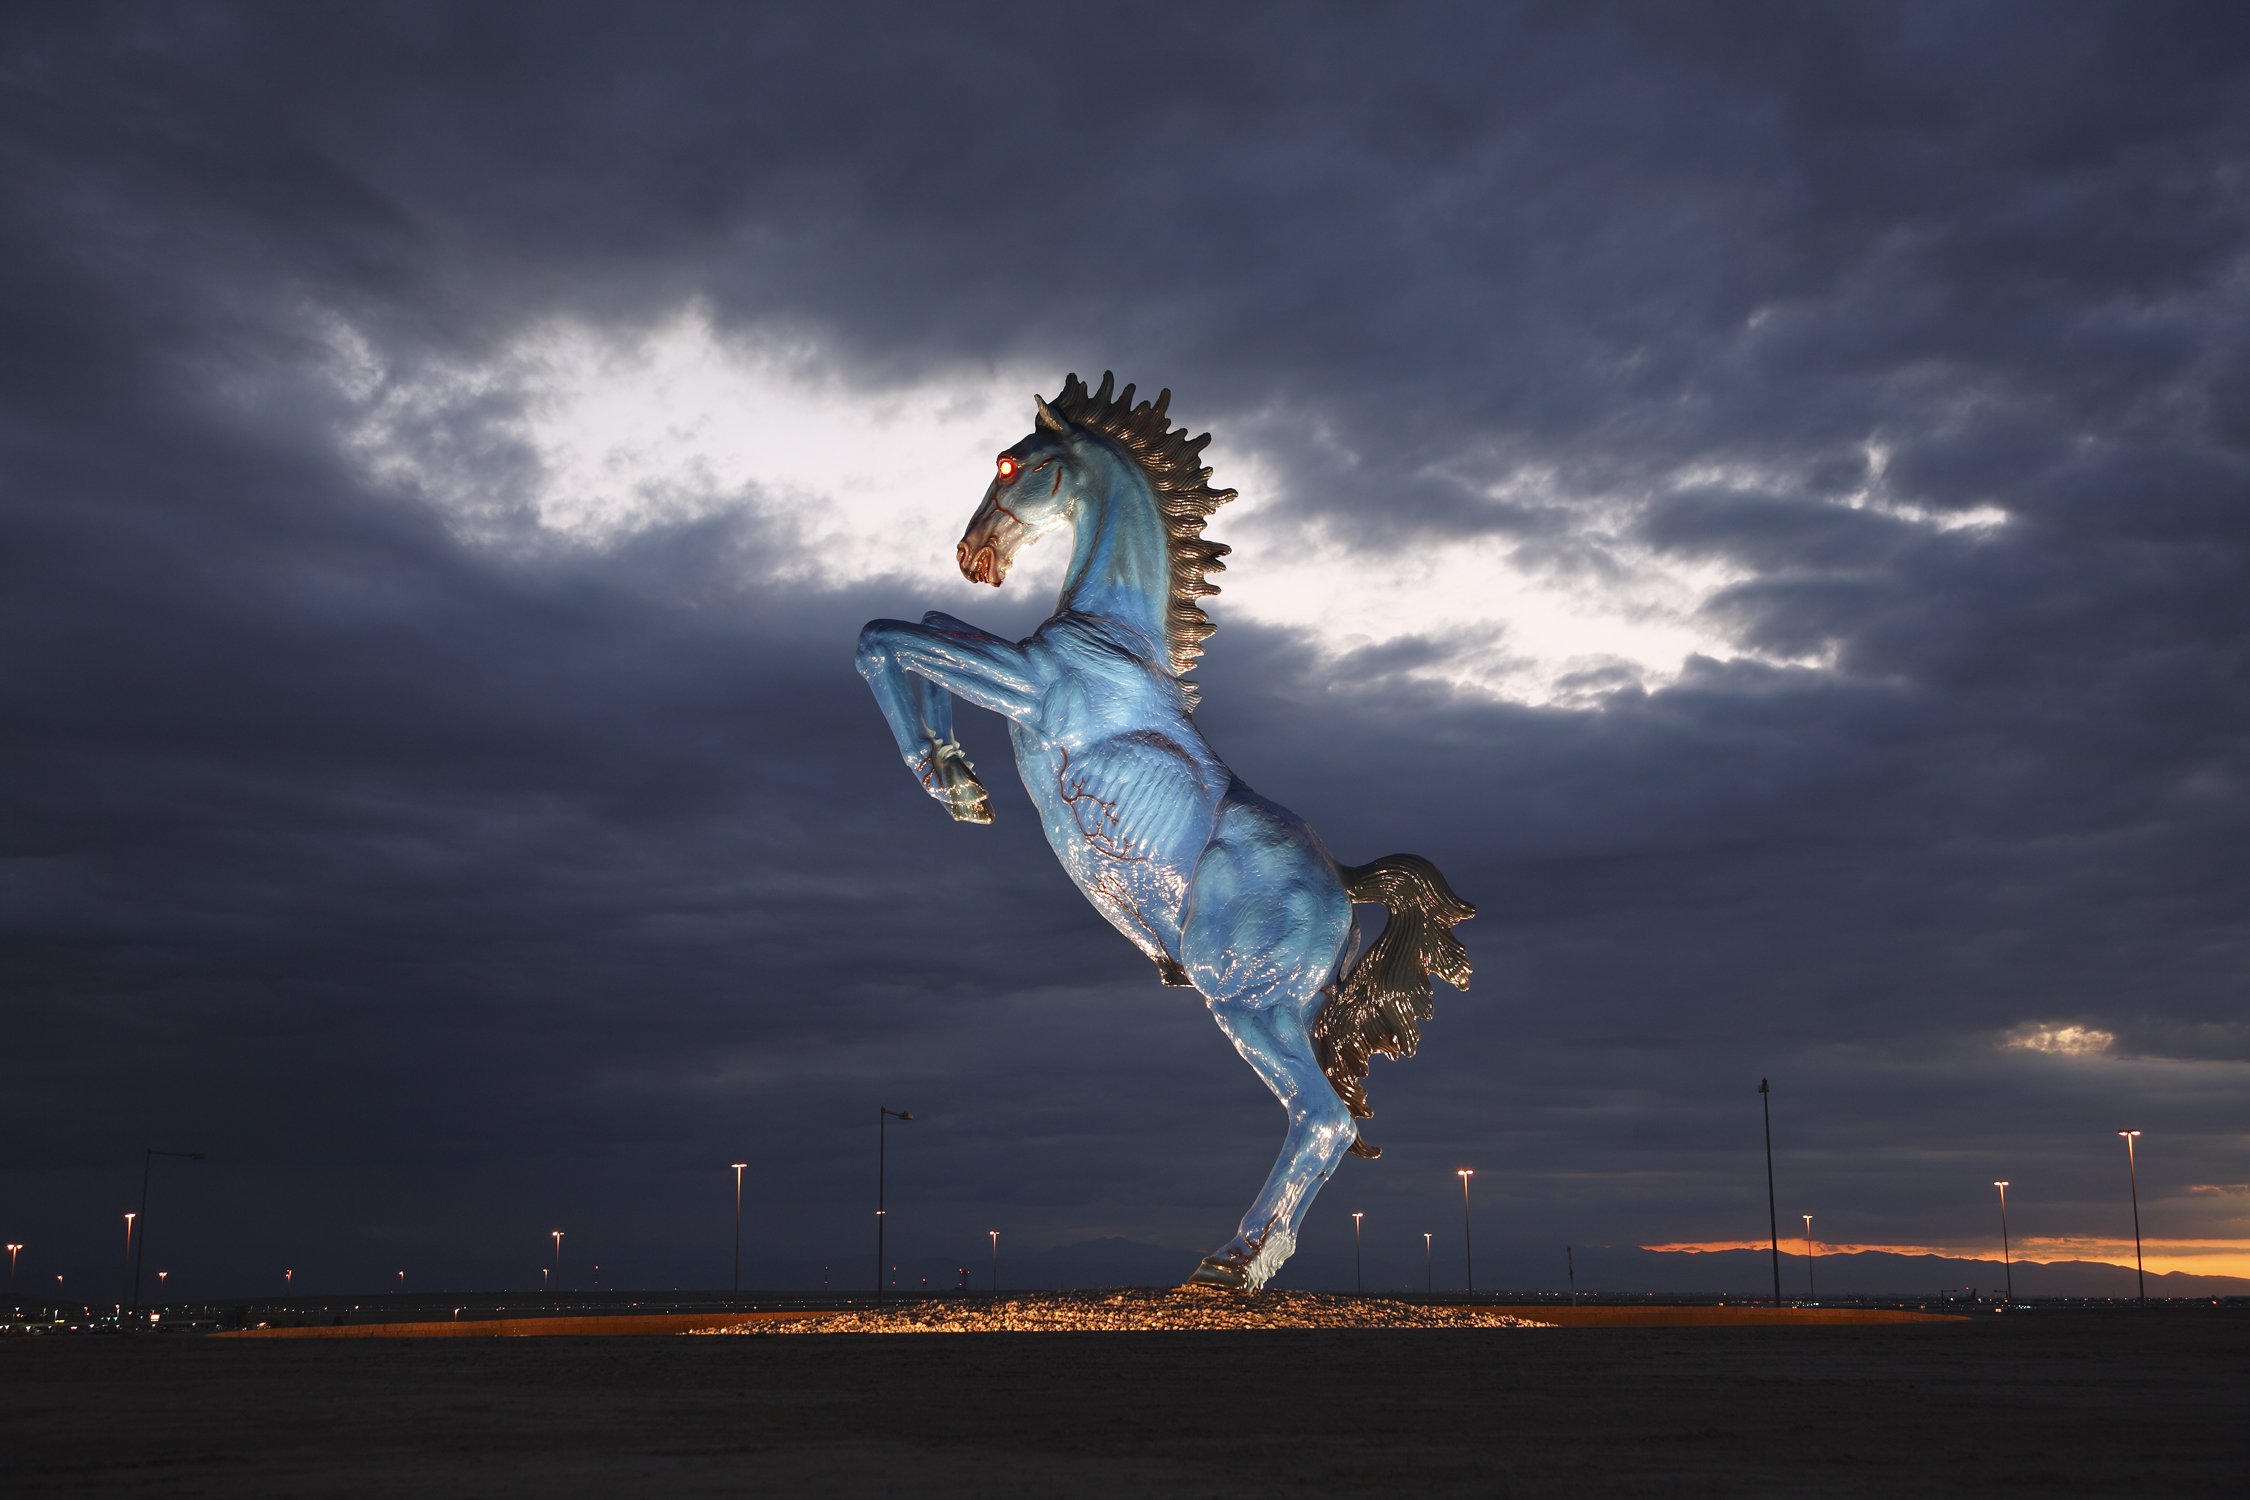 Say Hello to Blucifer: The Mysterious and Scary Denver Airport Horse Statue